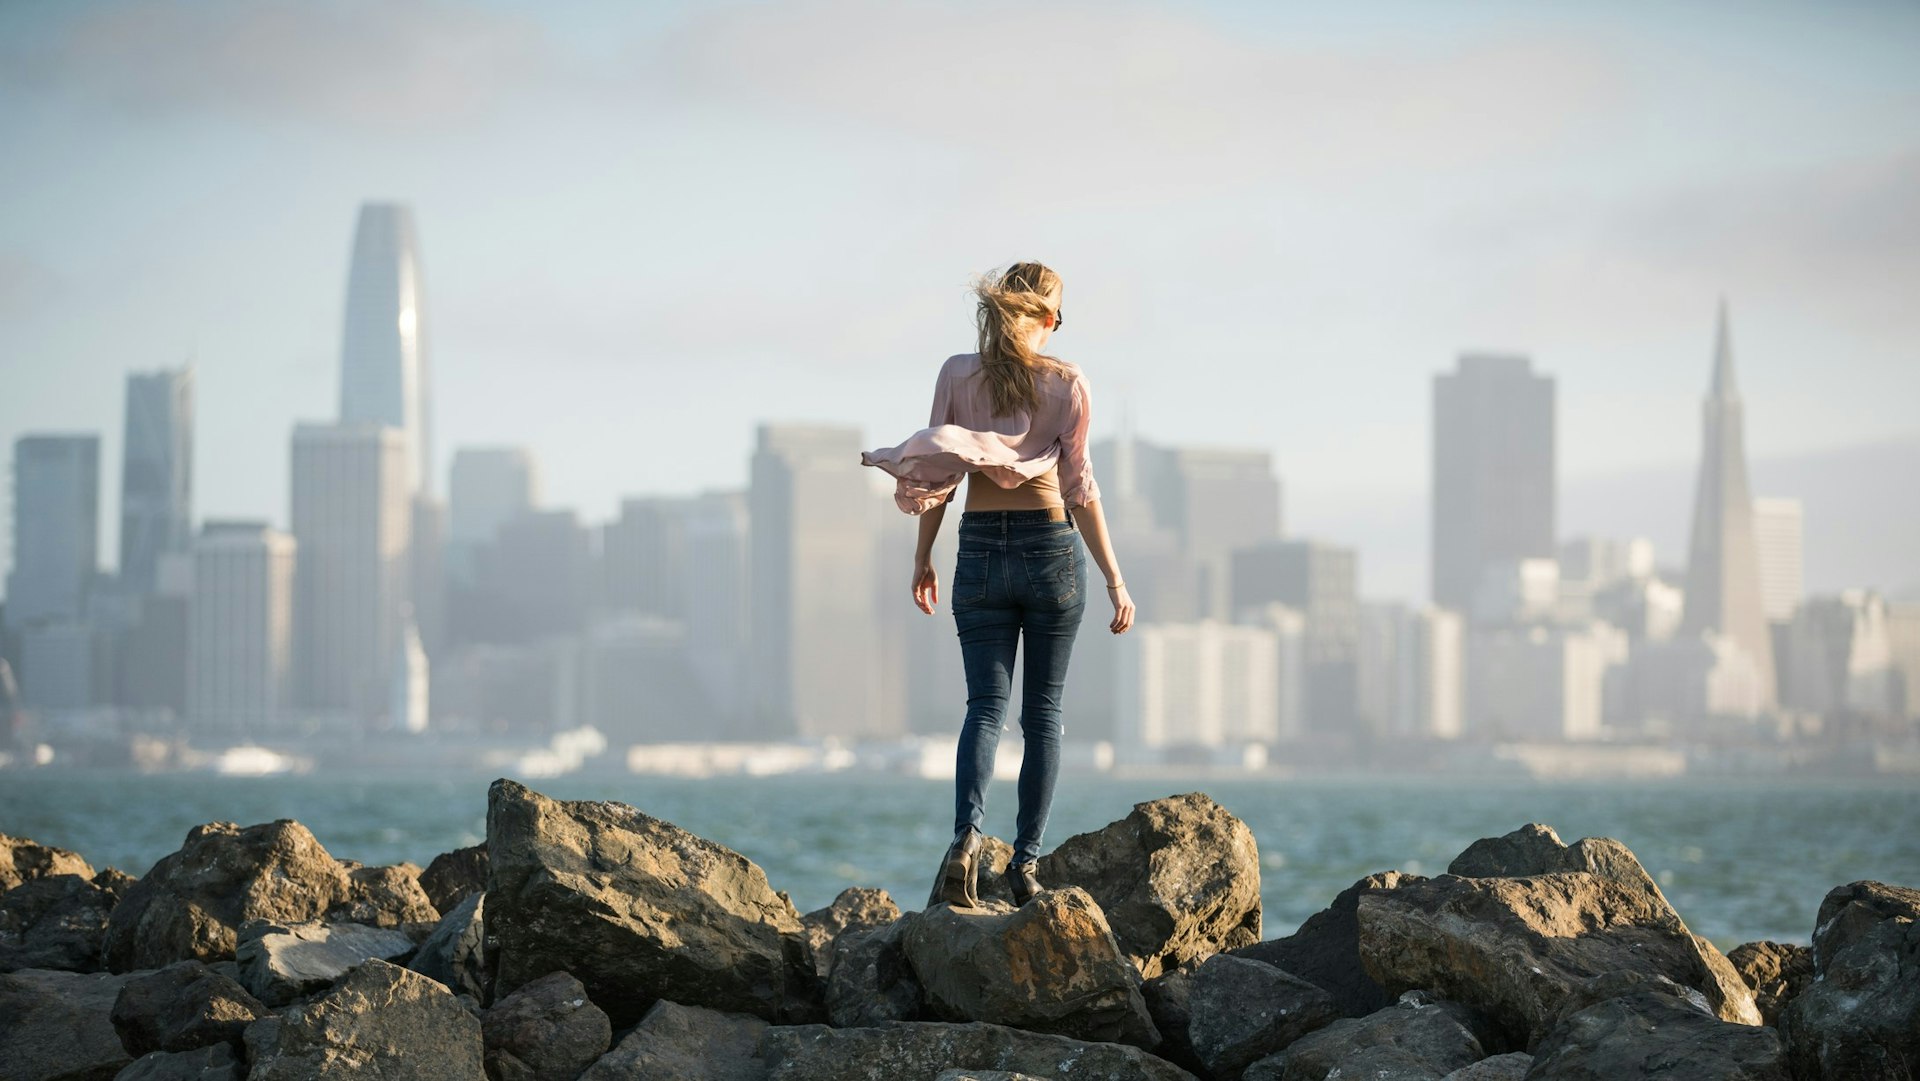 A woman stands on a rocky shore with her back to the camera, looking out at a city skyline across the water.